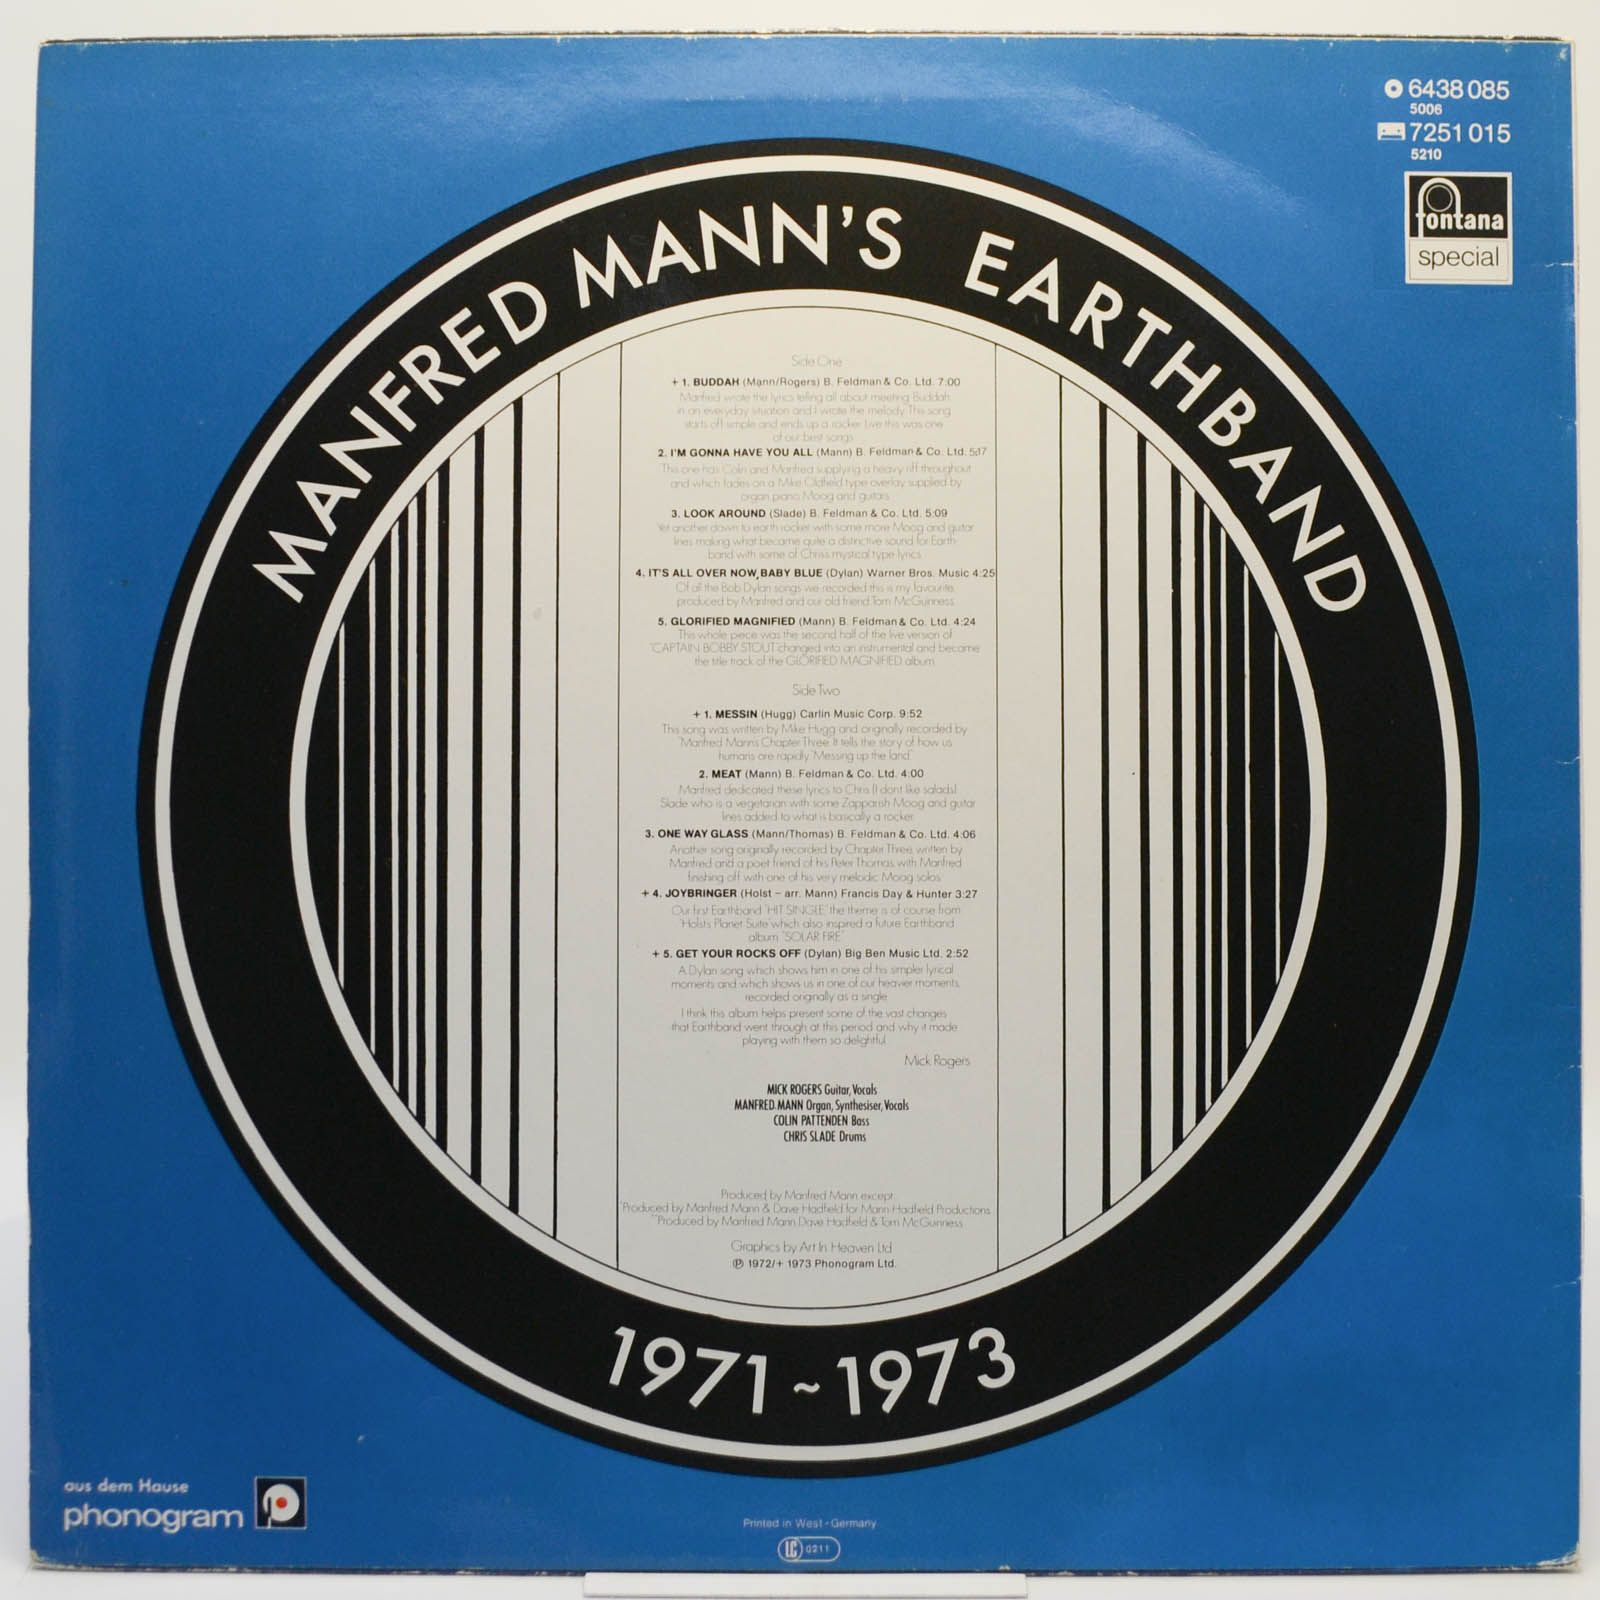 Manfred Mann's Earth Band — 1971 - 1973, 1977